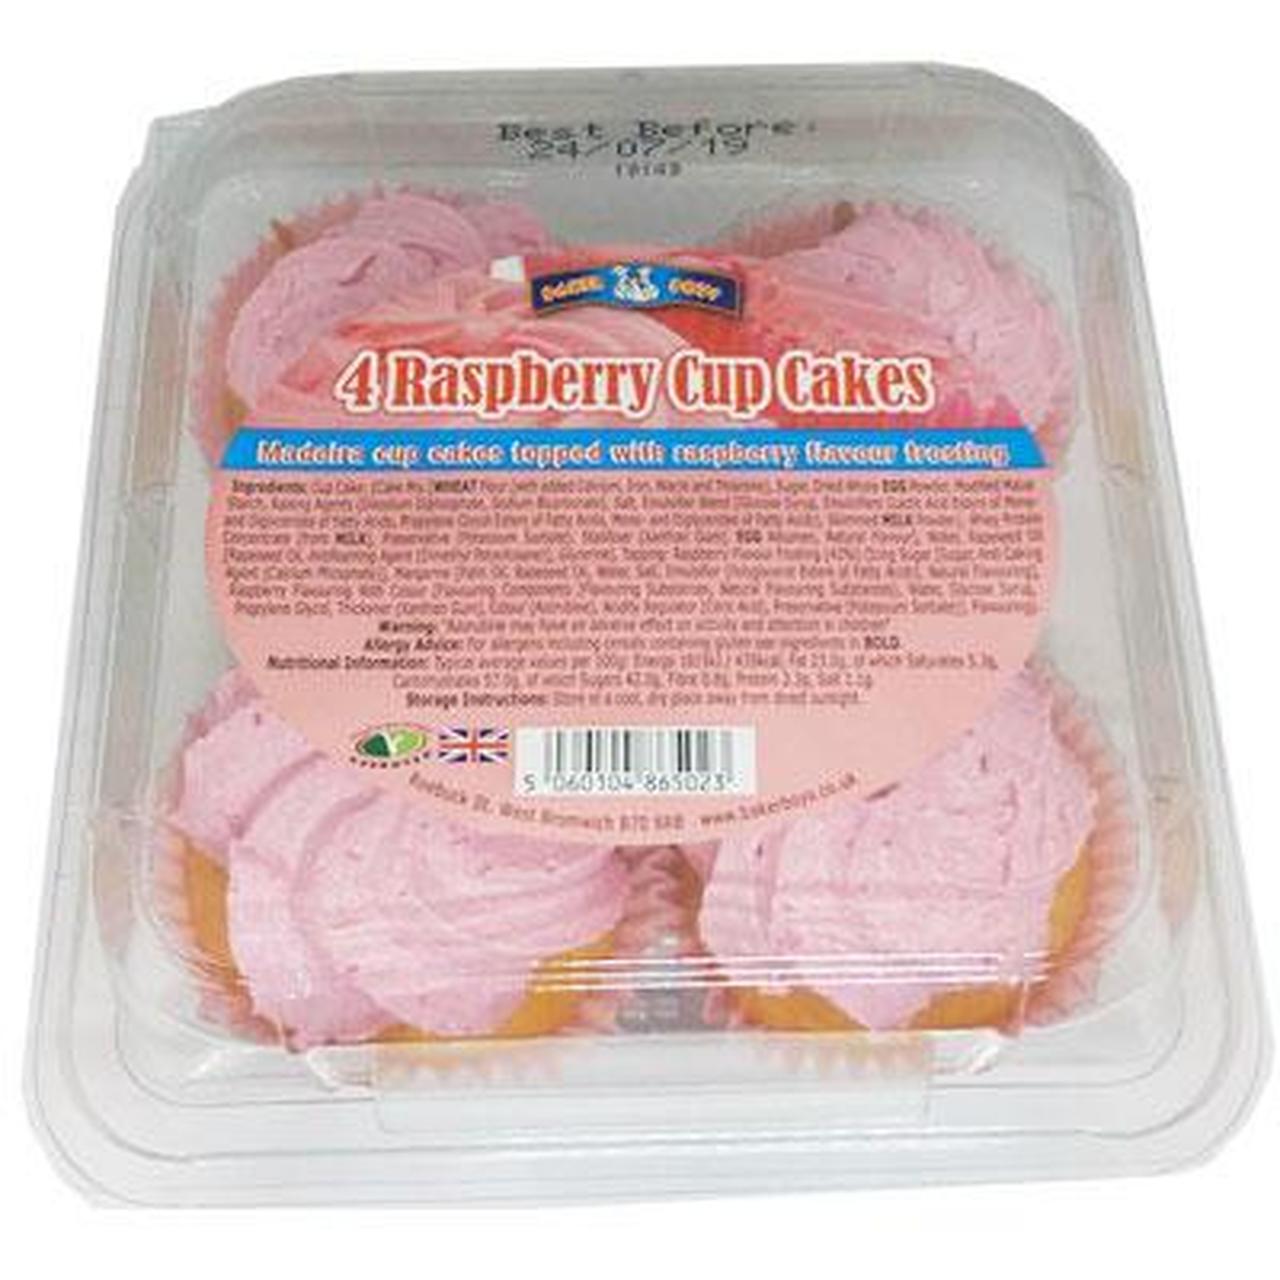 Baker Boys 4 Raspberry Cup Cakes (Jan - Dec 23) RRP £1.49 CLEARANCE XL 89p or 2 for £1.50